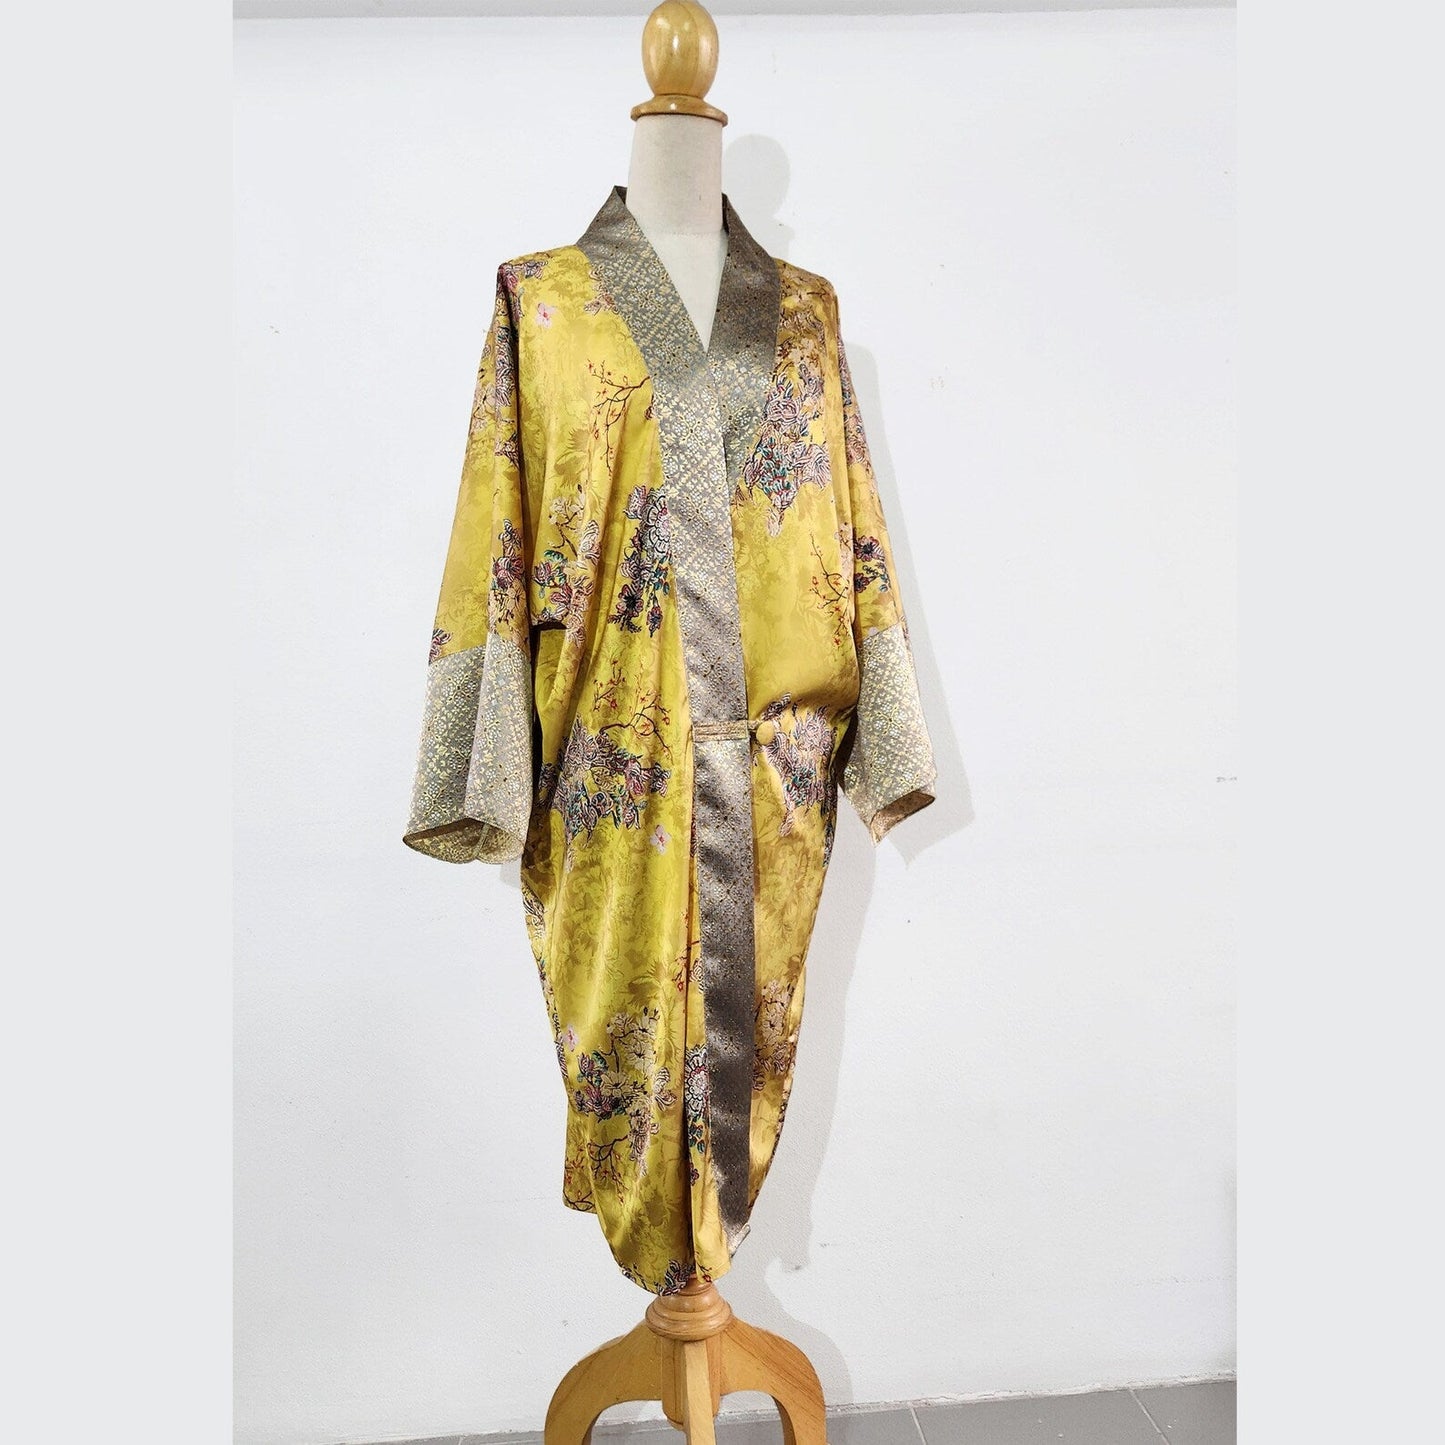 Yellow and gold kimono robe inspired by 1920s loungewear fashion